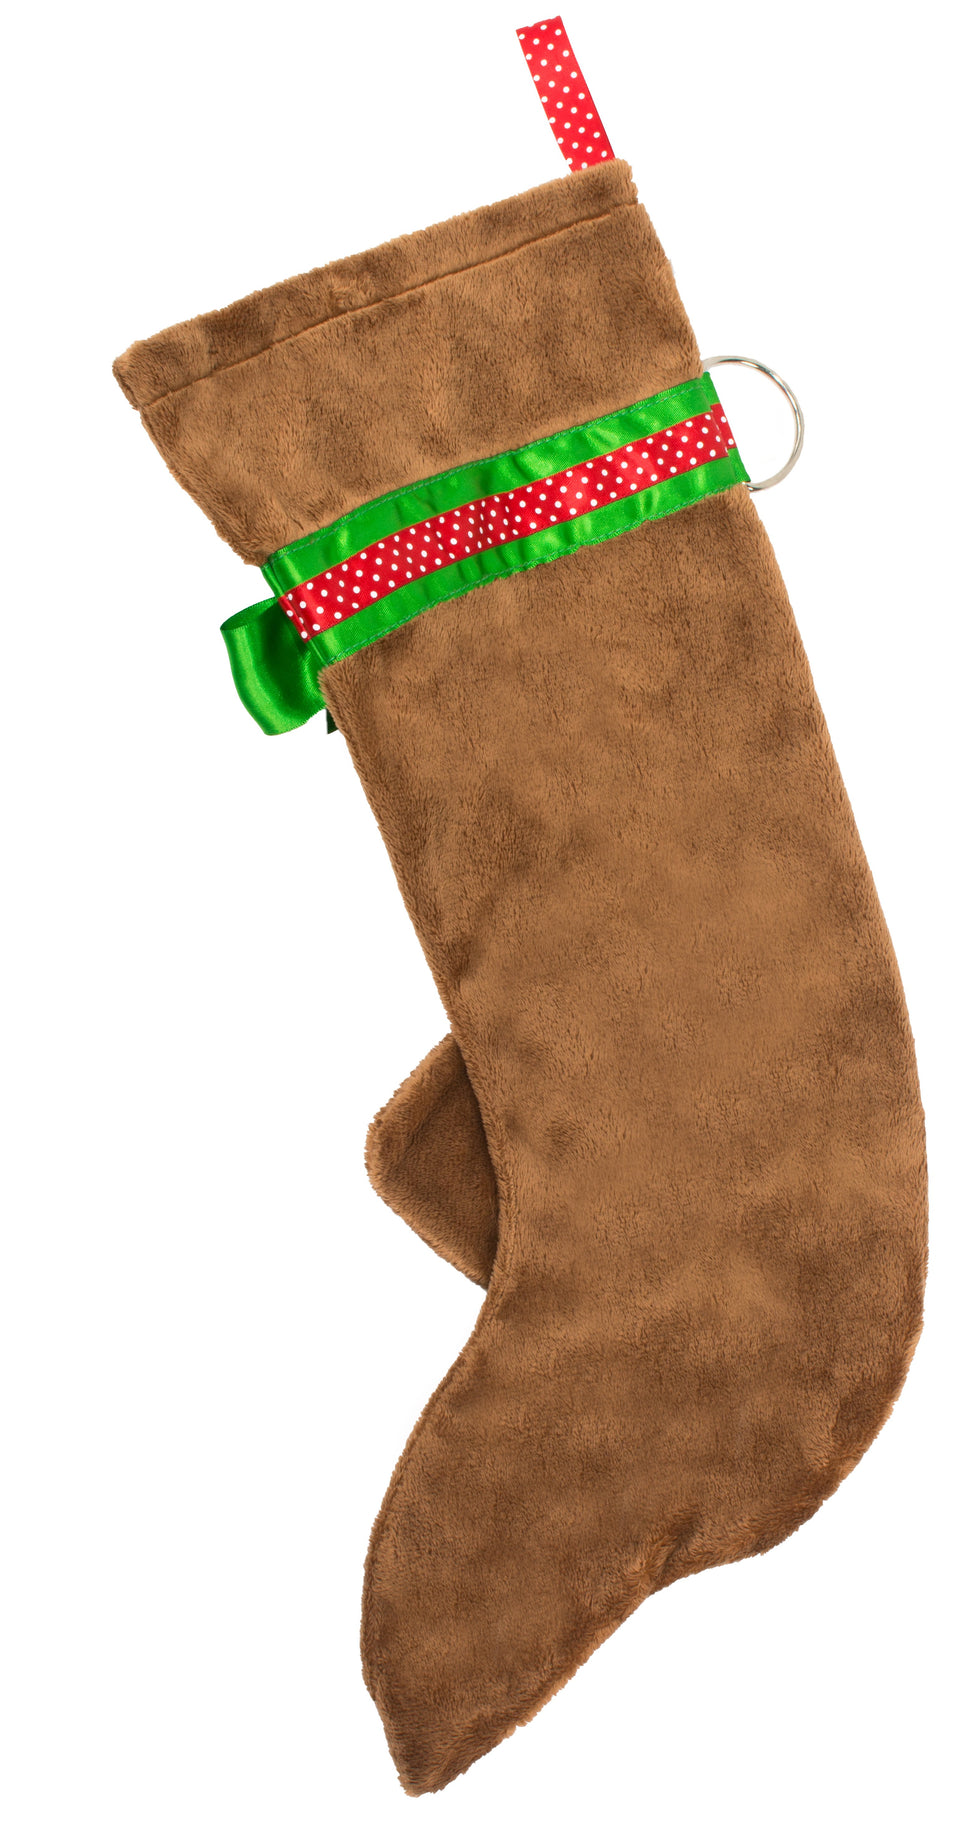 This Red Dachshund Christmas dog stocking is perfect for stuffing toys and treats into to spoil your fur baby for Christmas, or whatever holiday you celebrate!